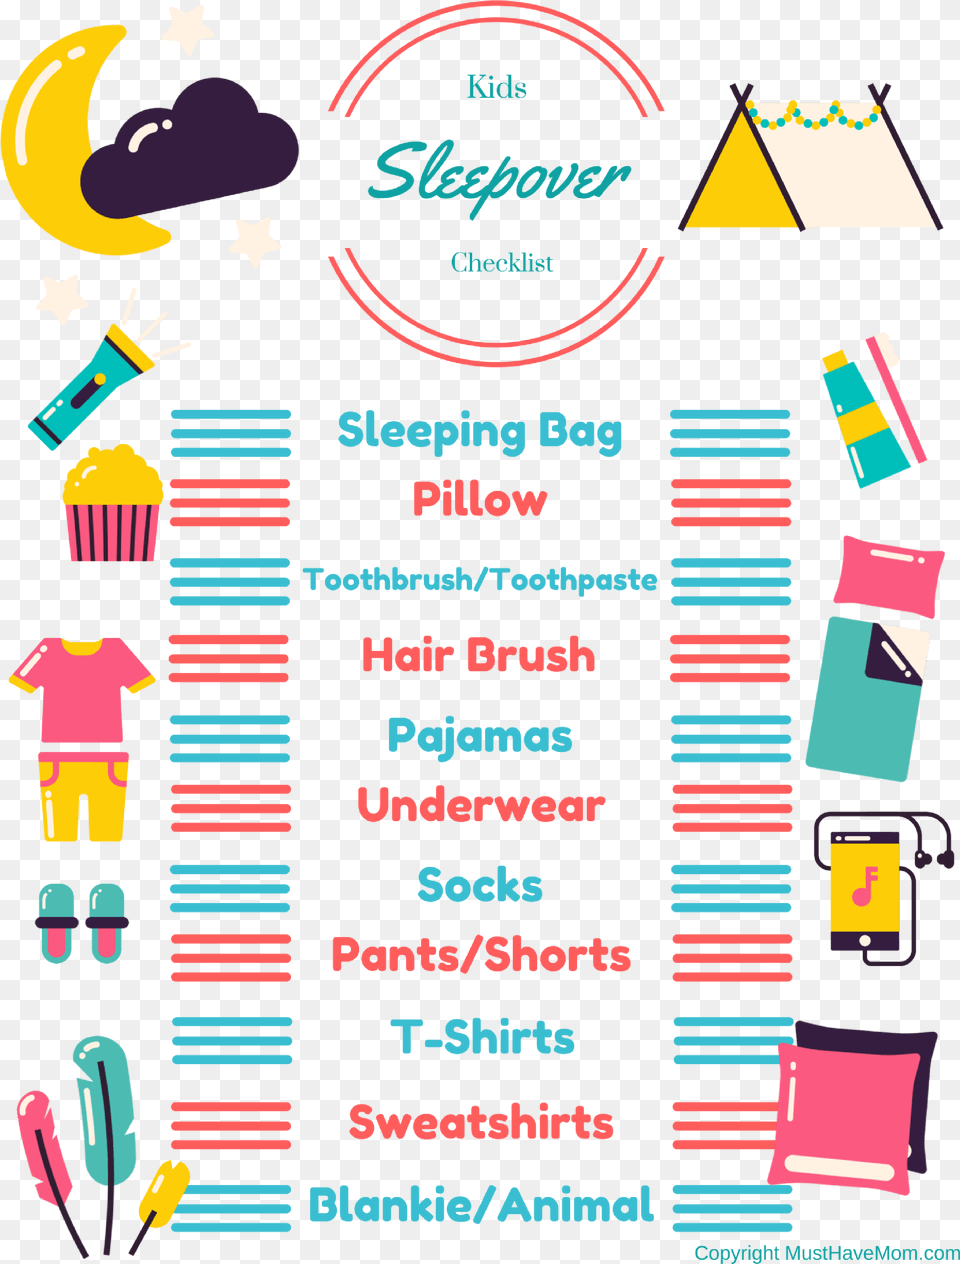 Printable Sleepover Checklist For Kids Kids Can Sleepover Packing List, Advertisement, Poster Png